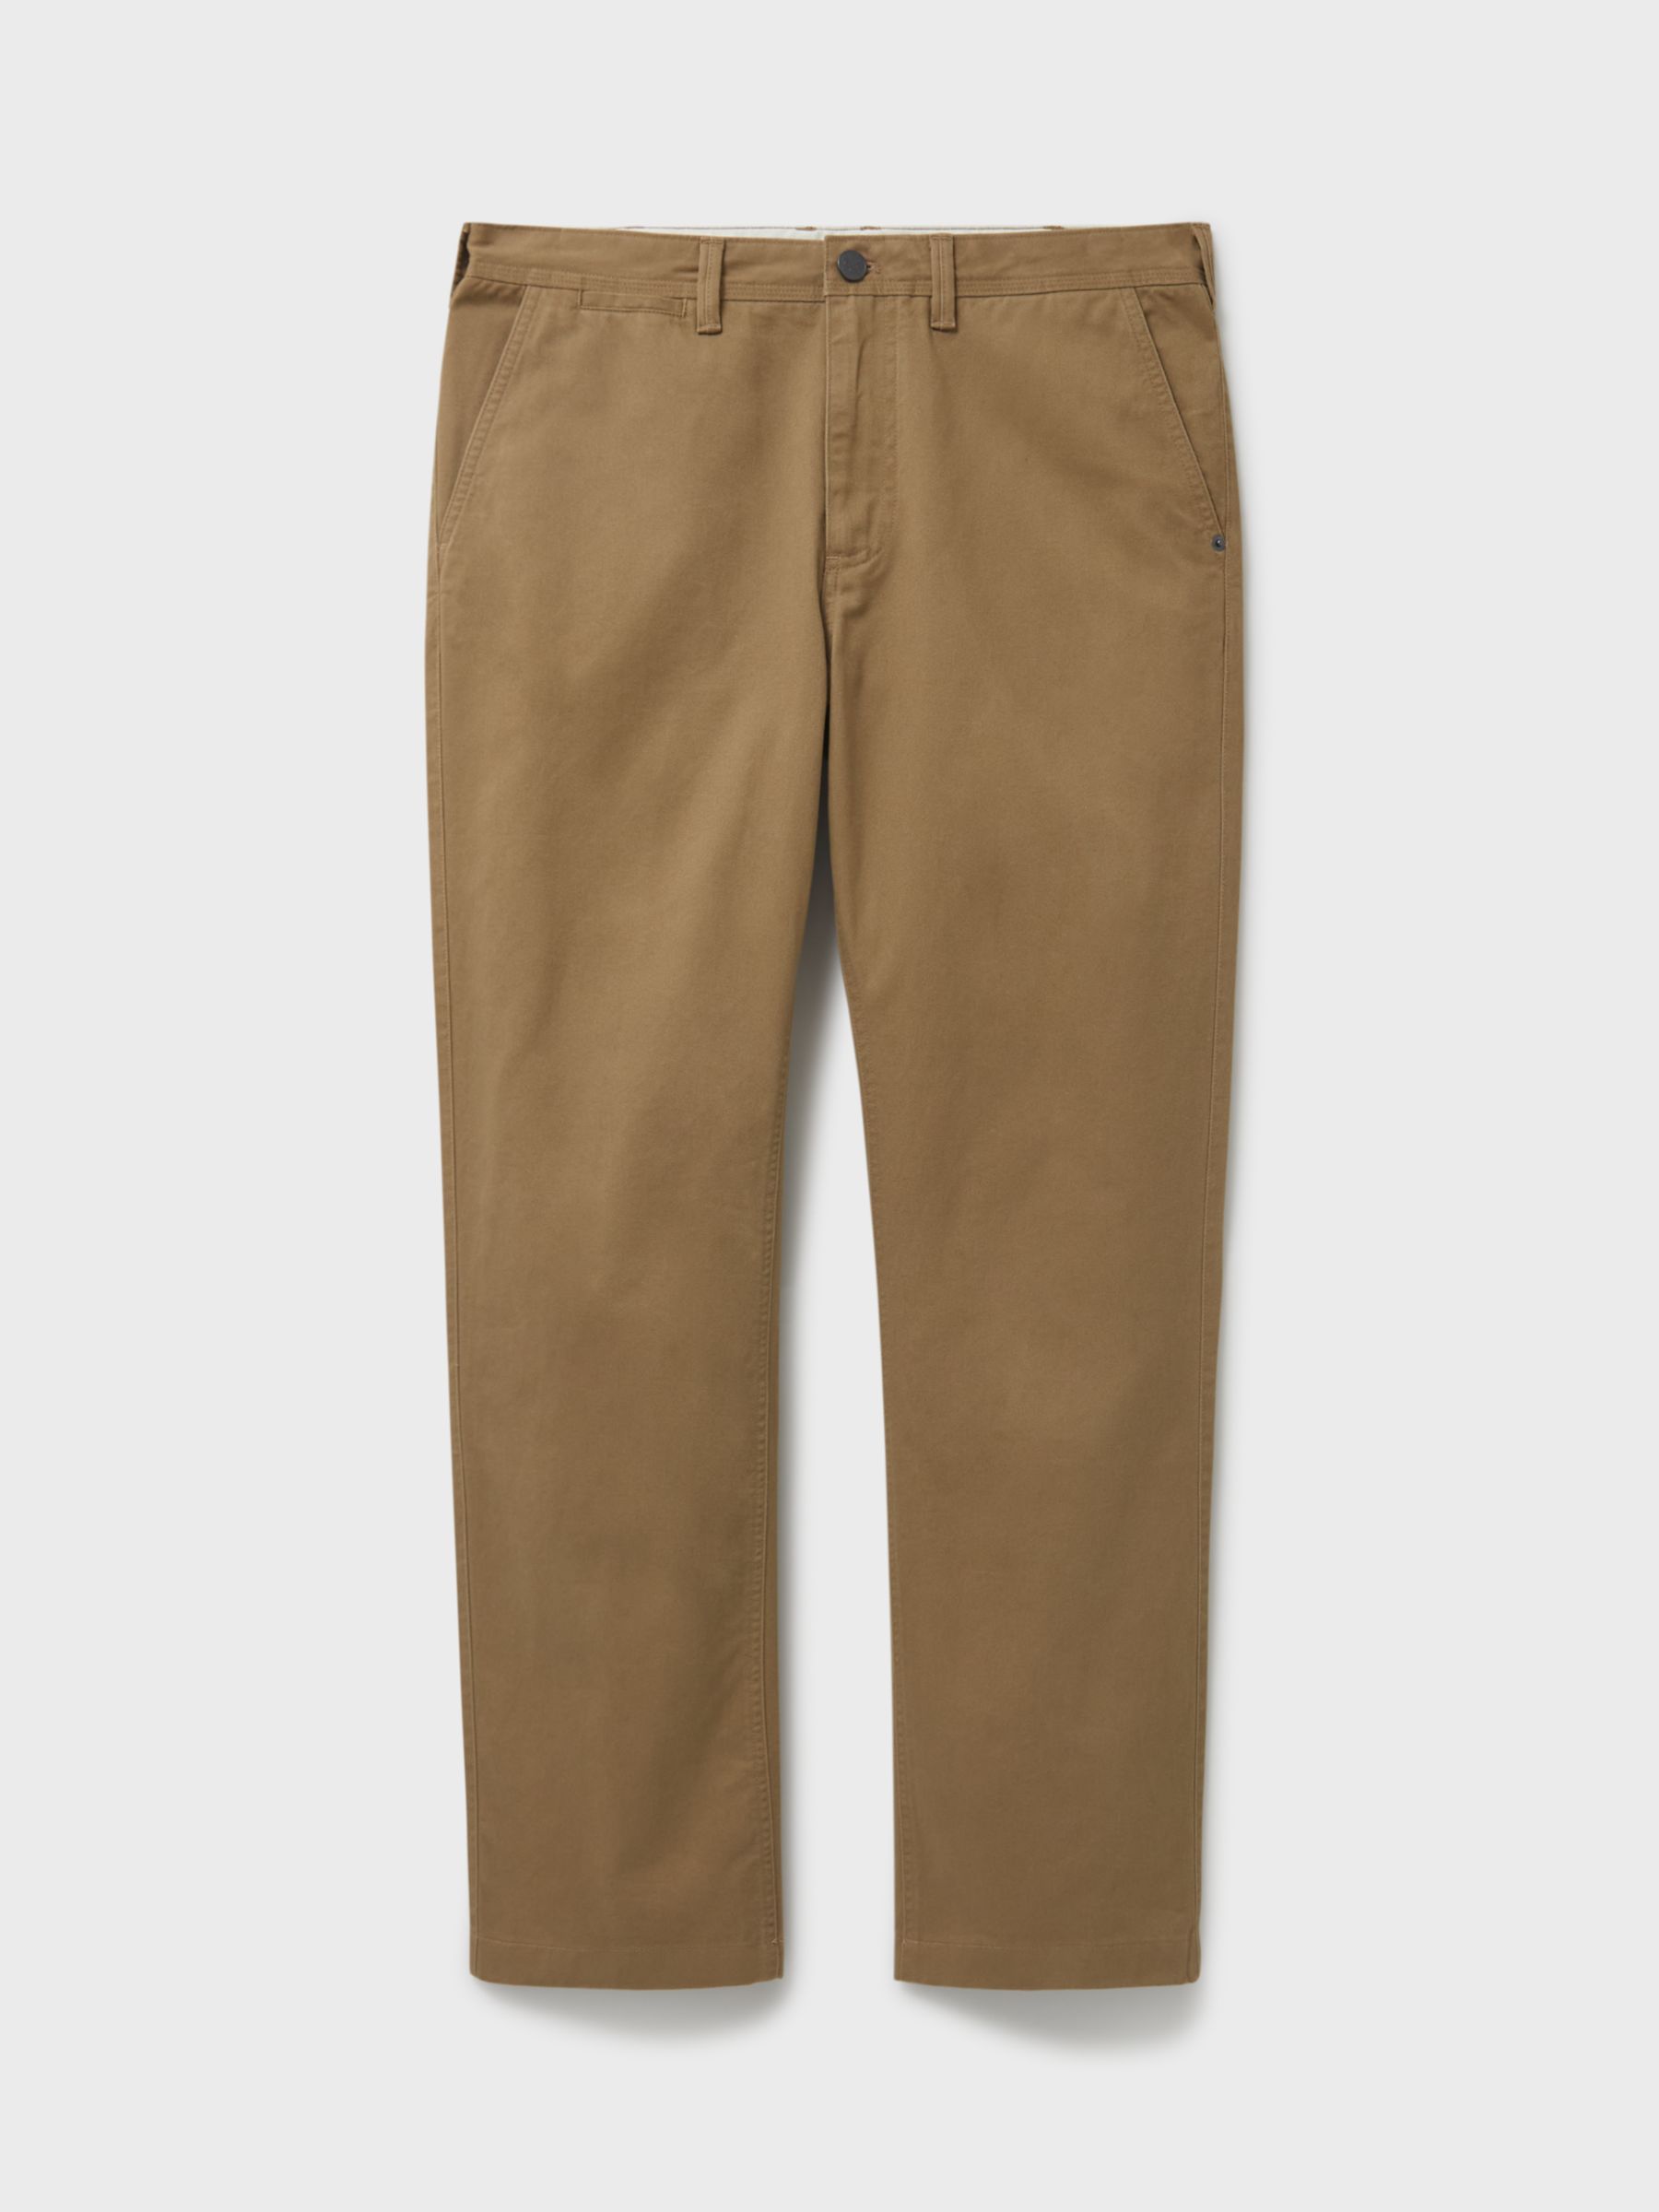 Crew Clothing Cotton Vint Chinos, Taupe, 34L